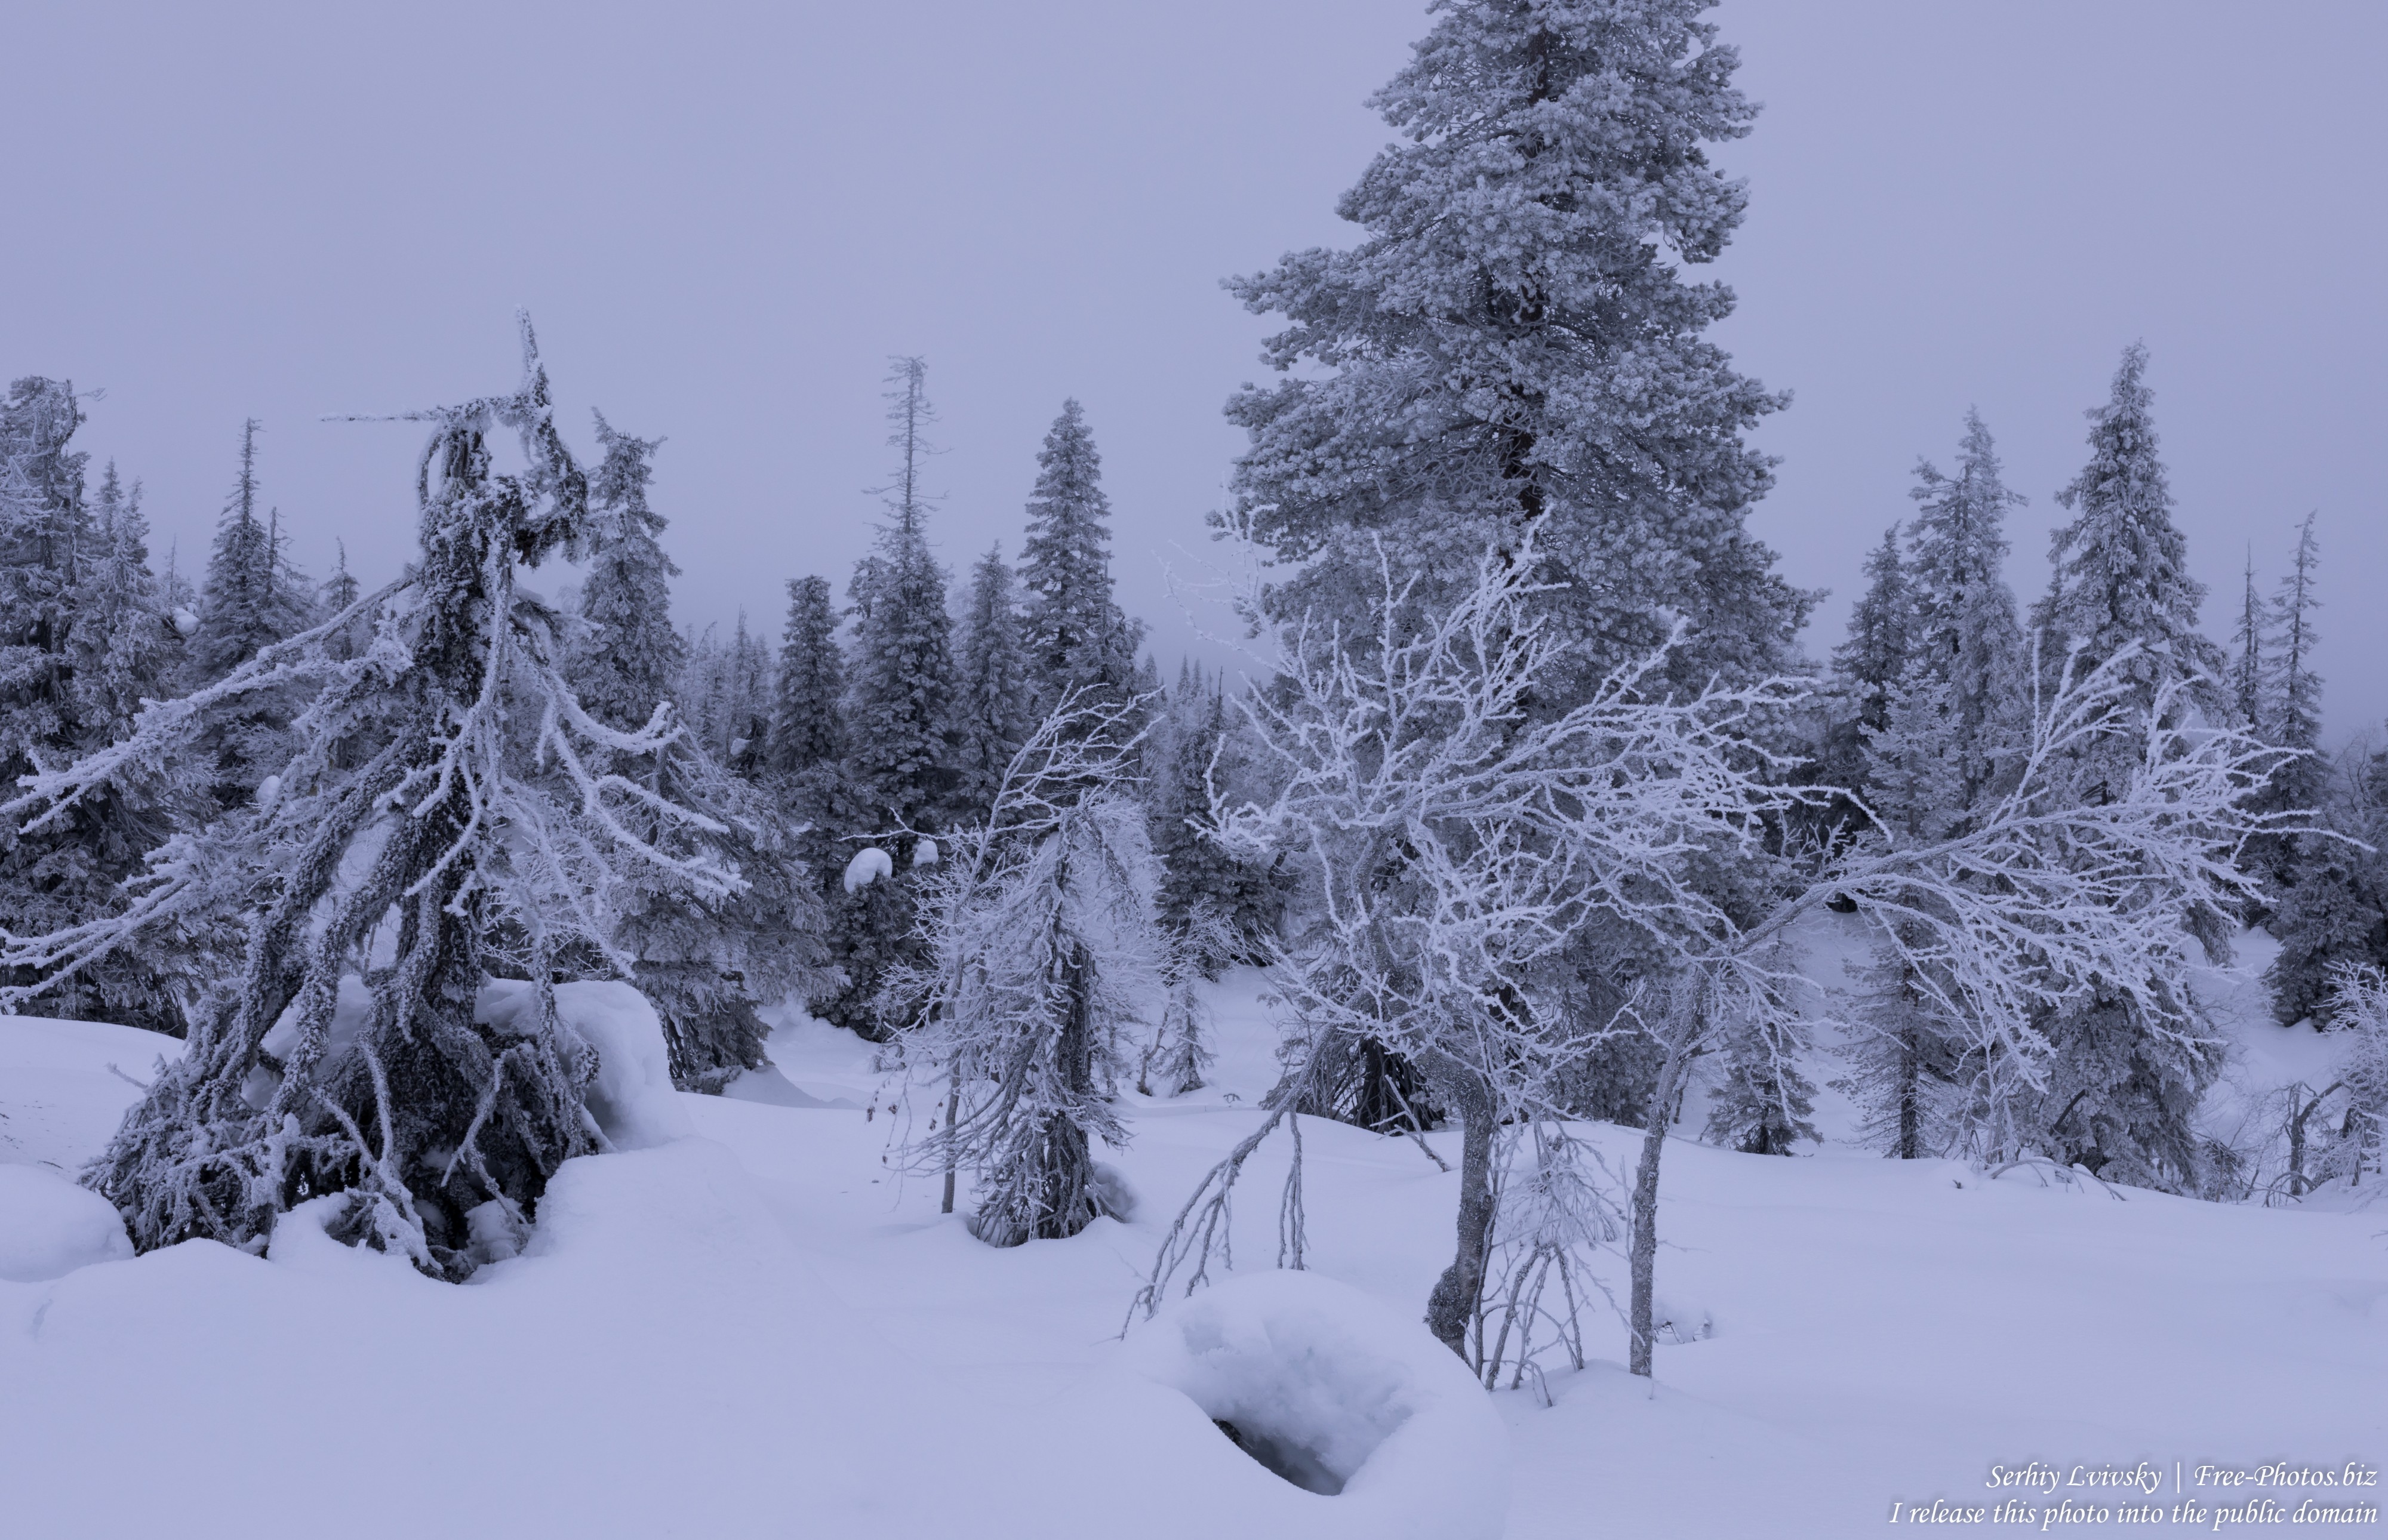 Riisitunturi, Finland, photographed in January 2020 by Serhiy Lvivsky, picture 18